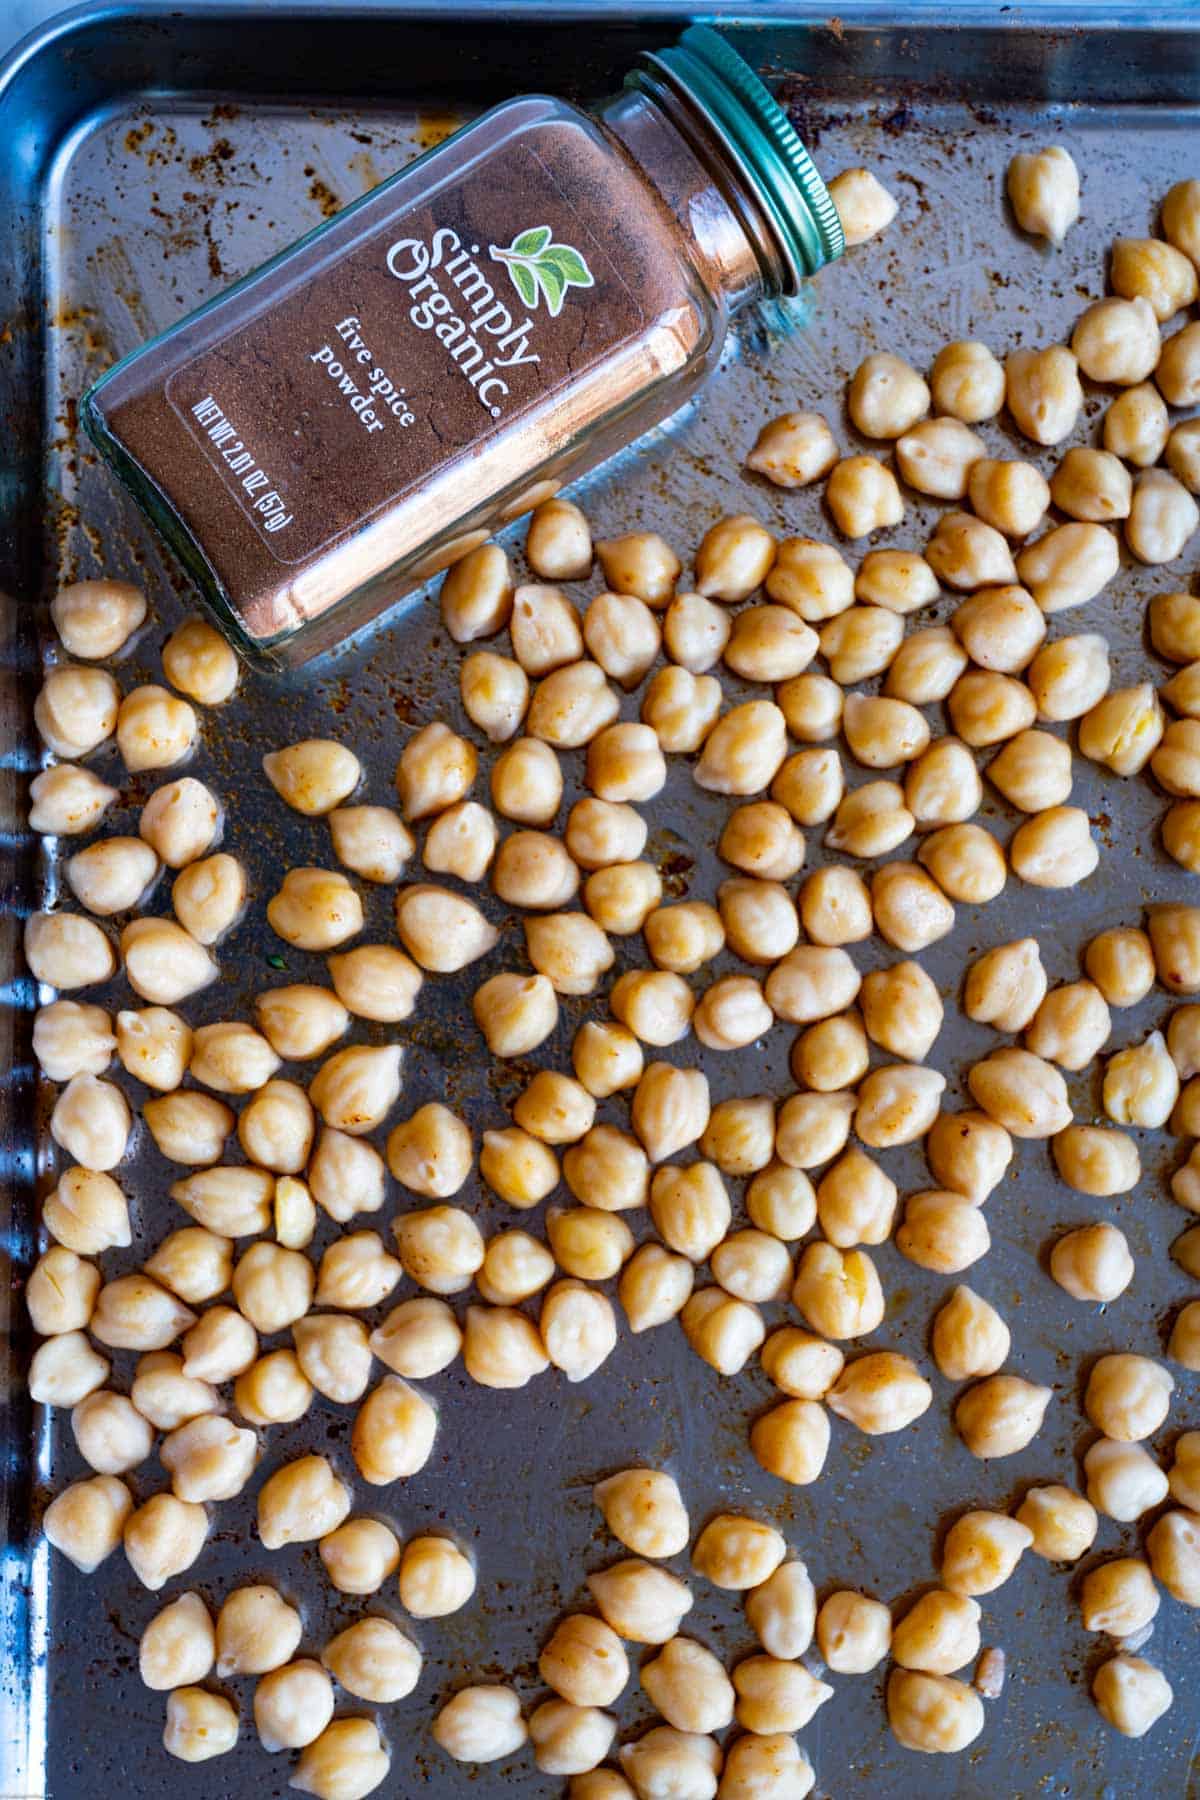 Chickpeas spread out on a stainless steel rimmed baking sheet with olive oil and five spice powder.